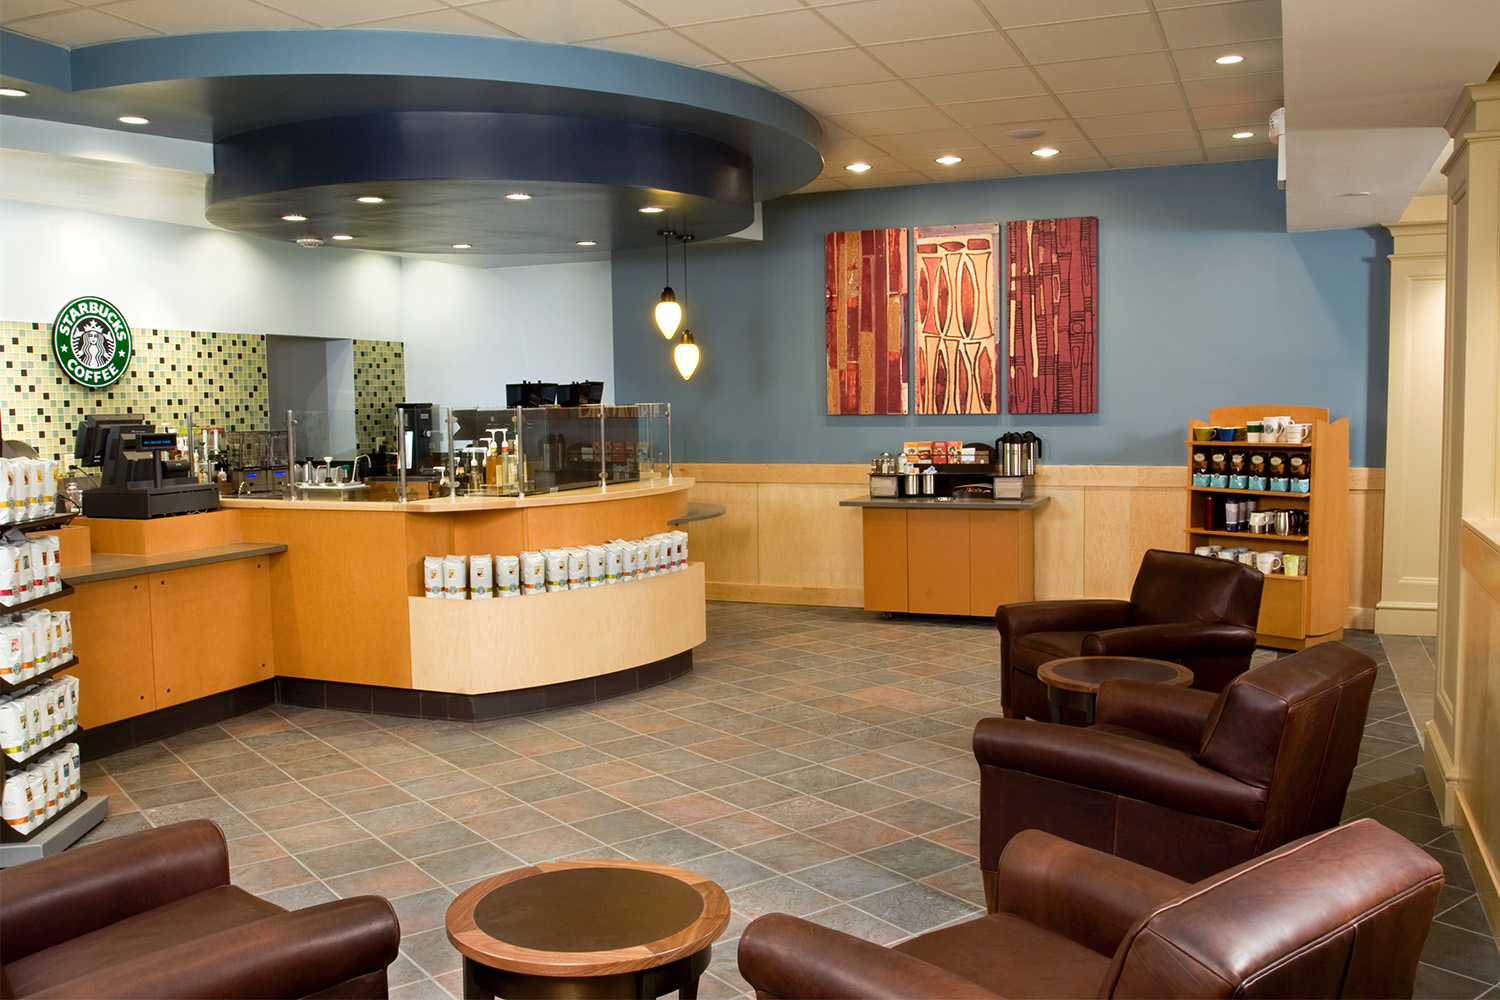 Starbucks café area with luxe brown leather chairs, tile floor, and blue painted walls 